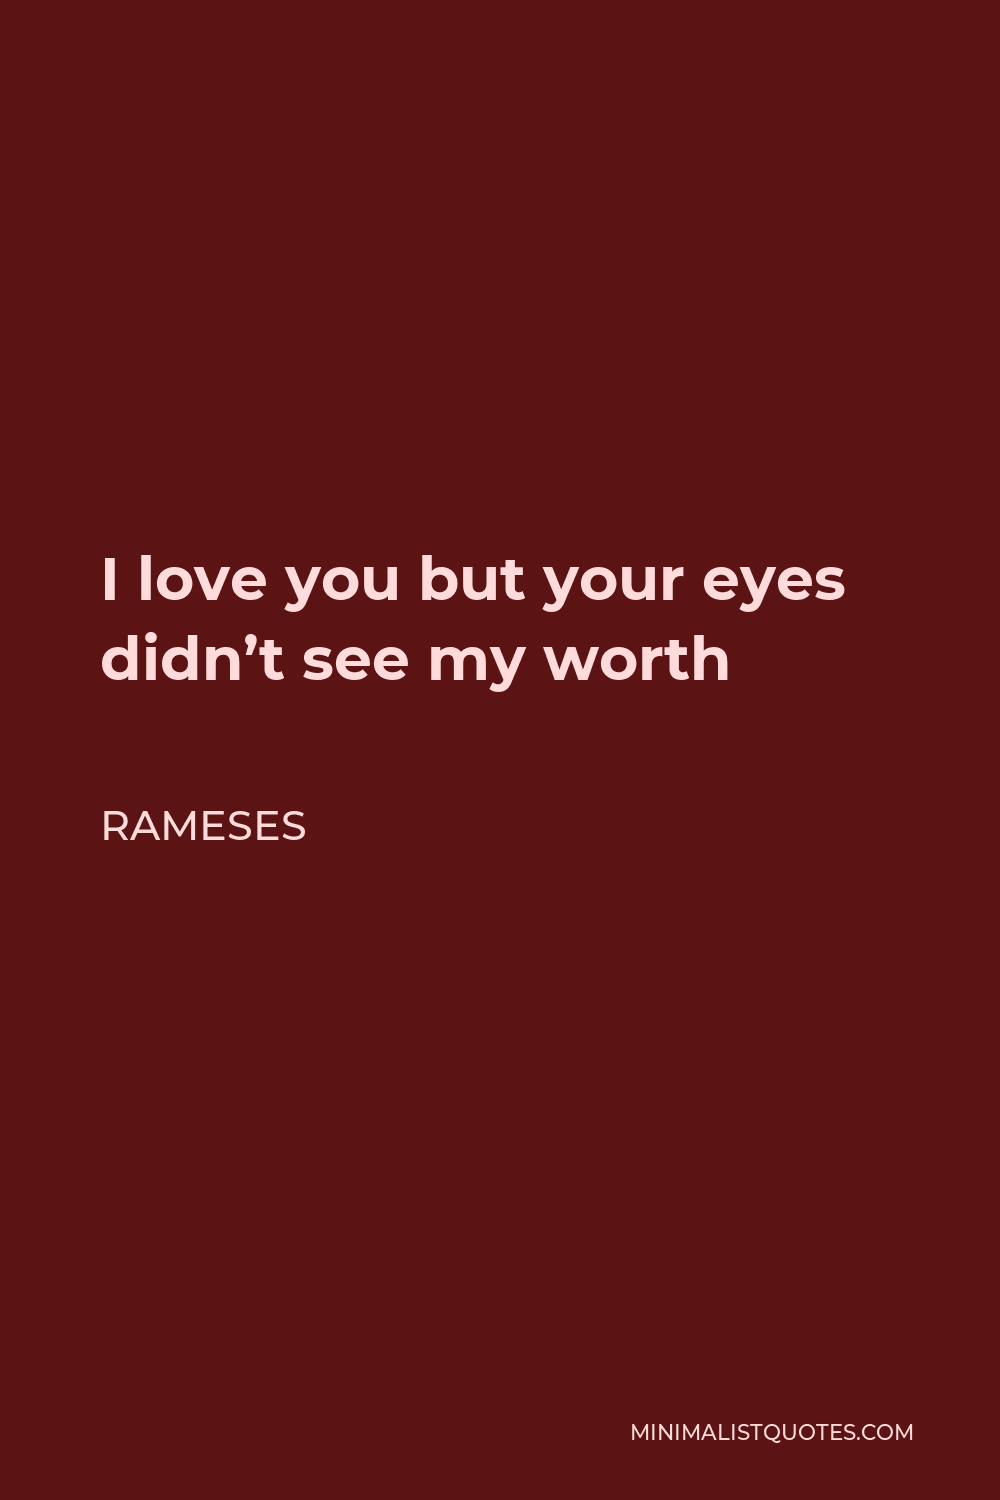 Rameses Quote - I love you but your eyes didn’t see my worth